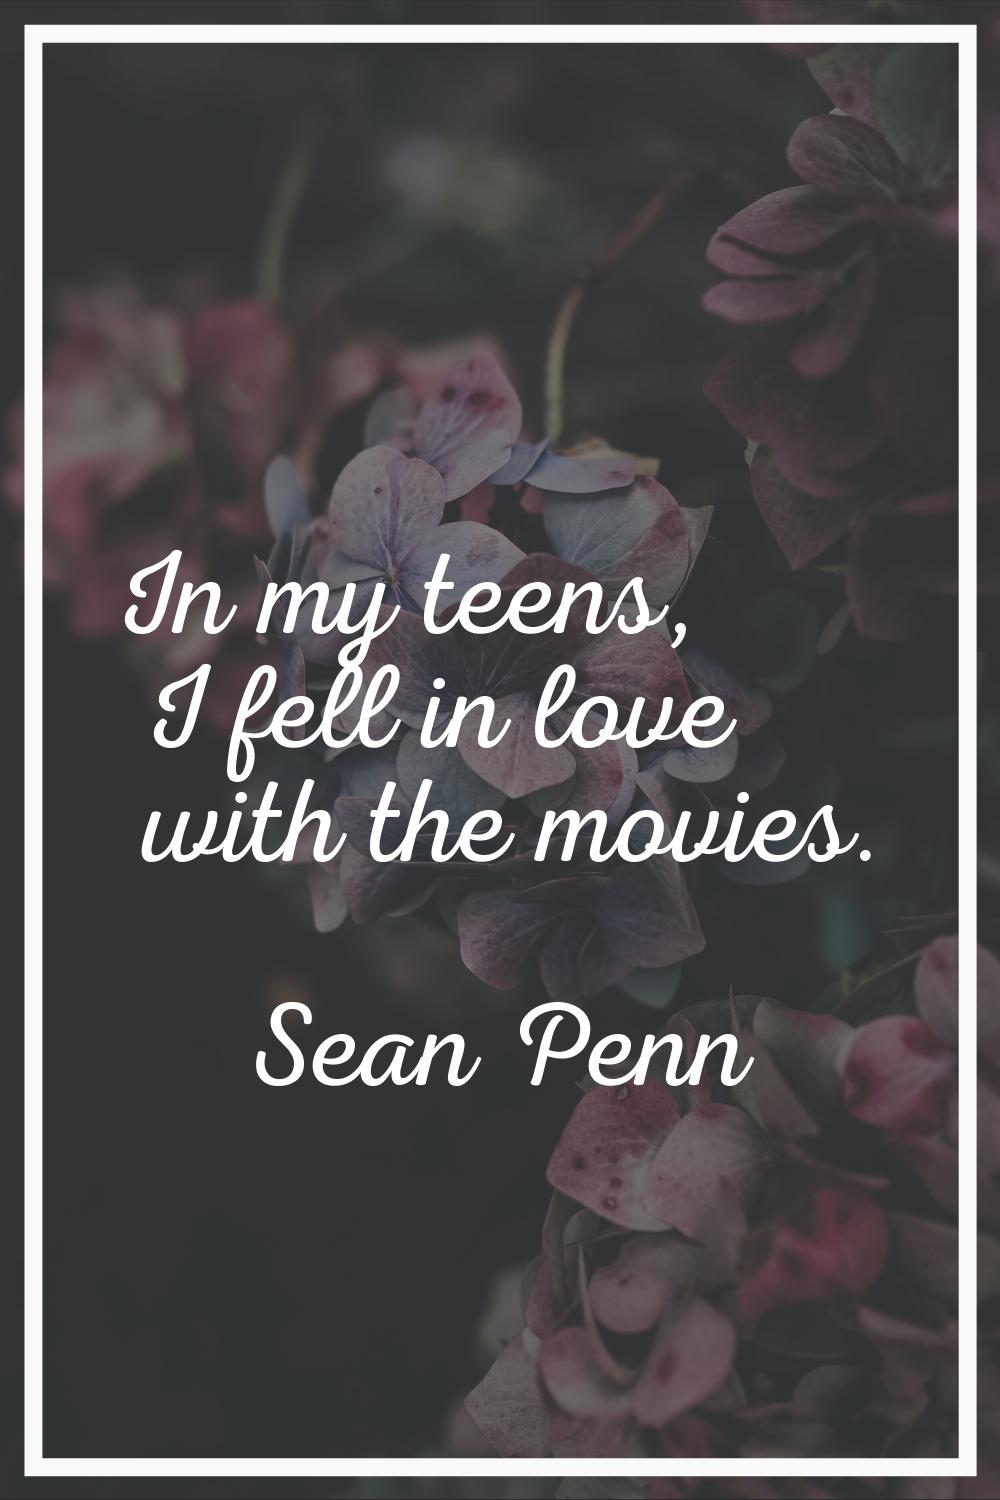 In my teens, I fell in love with the movies.